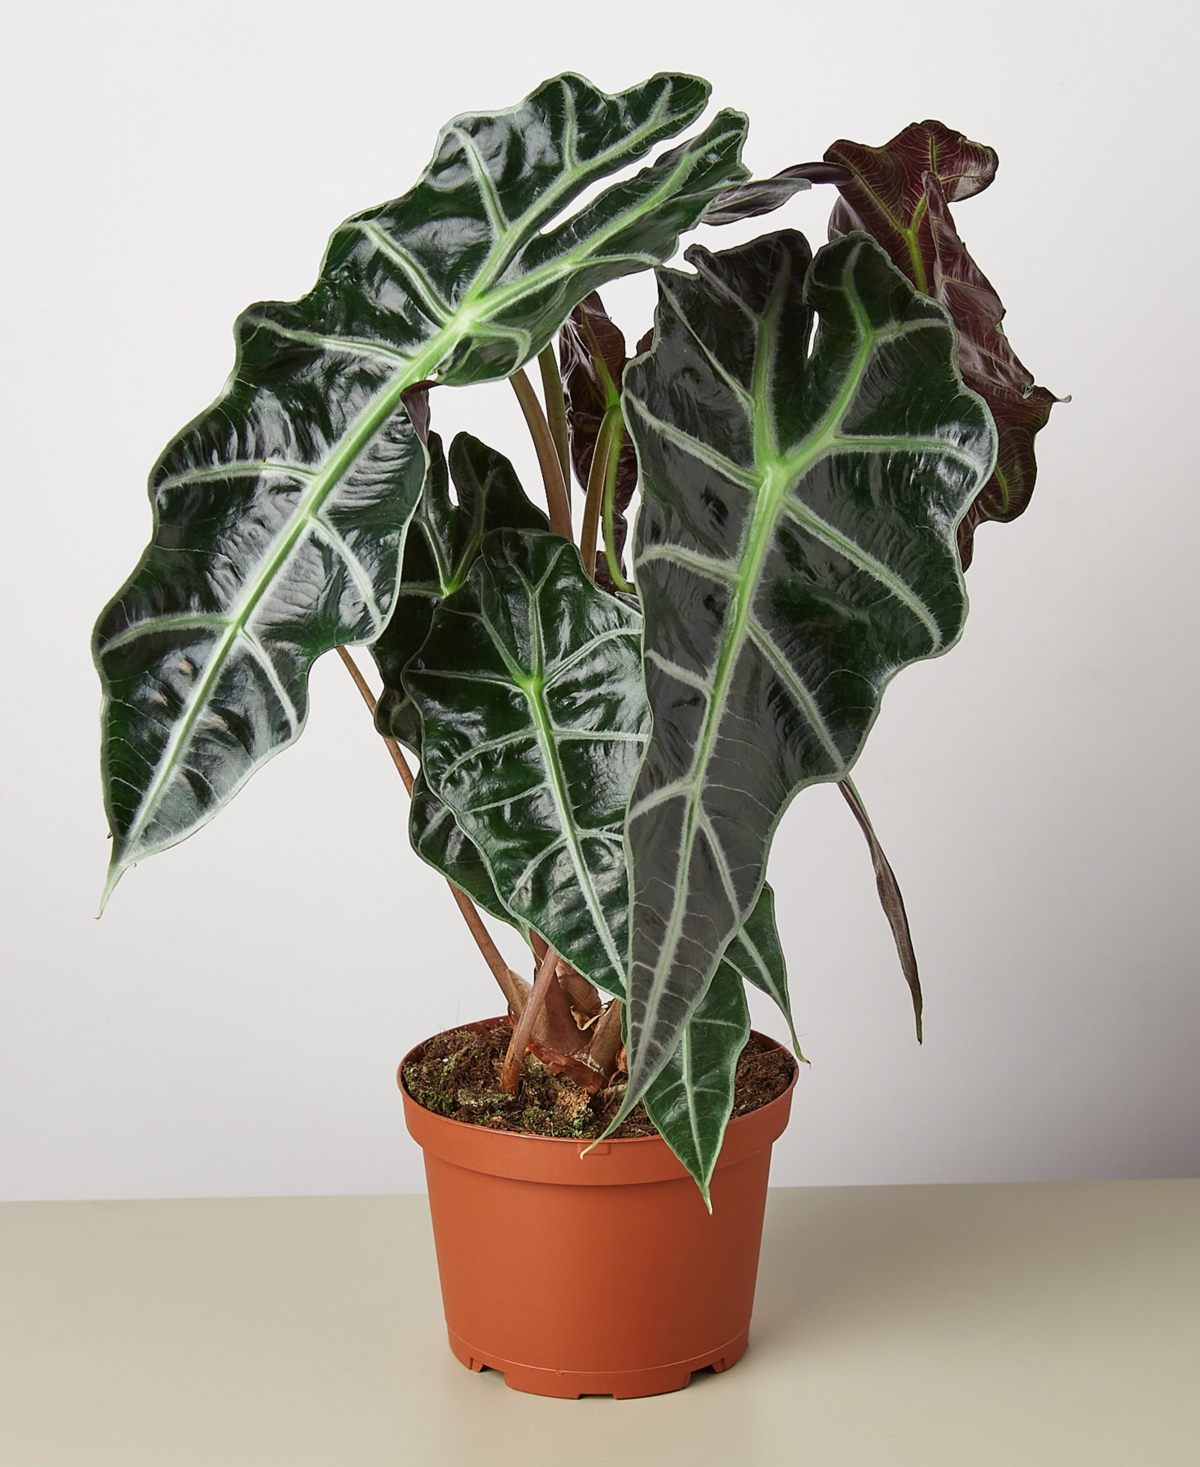 Alocasia Polly 'African Mask' Live Plant, 6" Pot